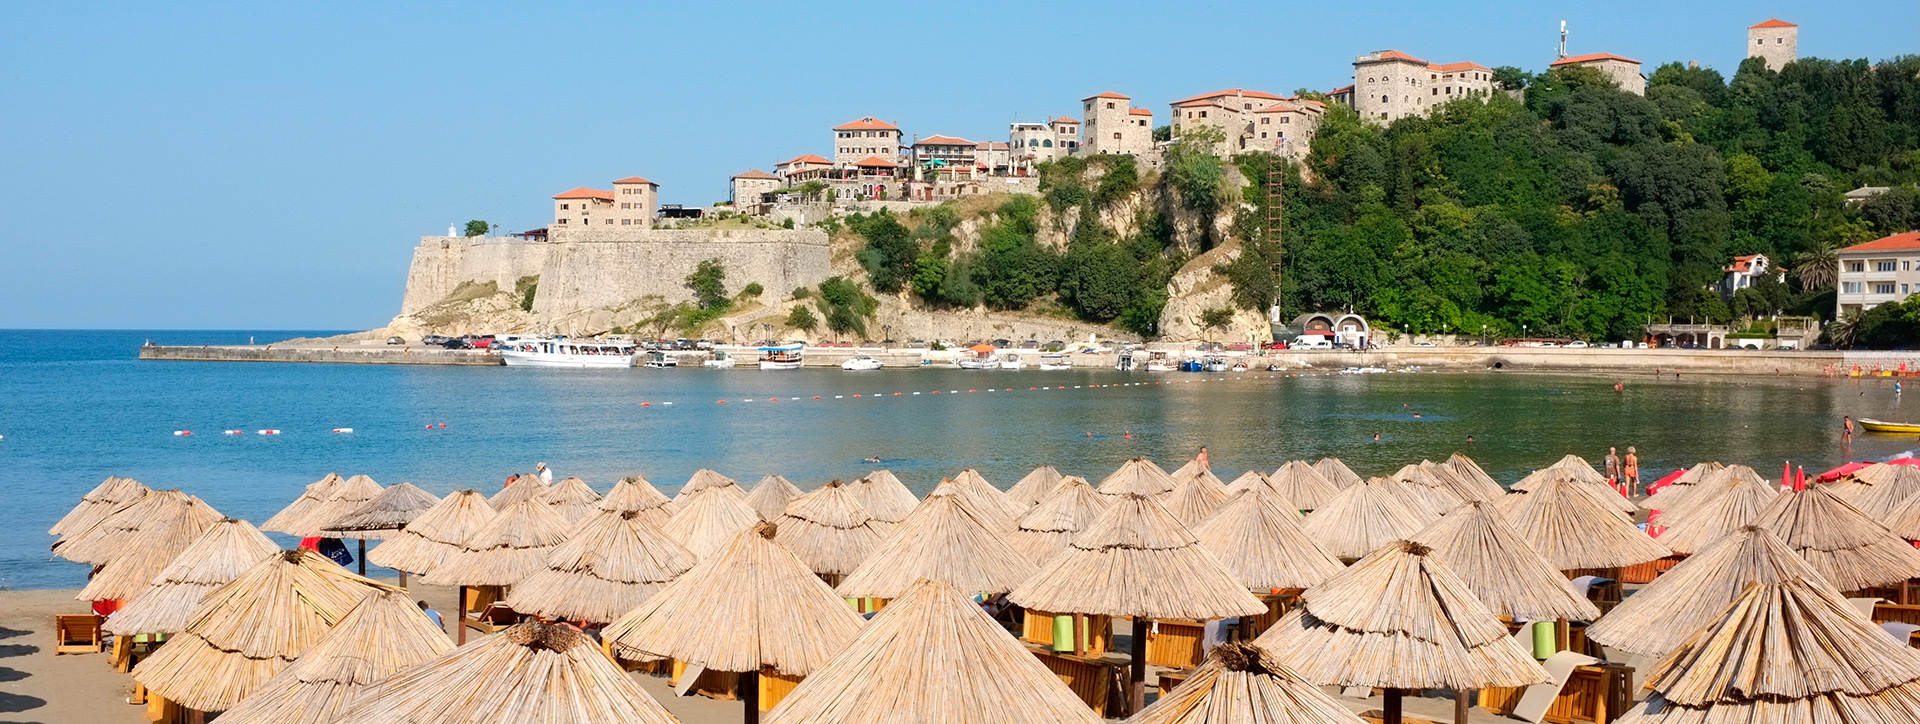 Beach view of the fortress, Ulcinj, Montenegro - Montenegrin waters SimpleSail sailing routes